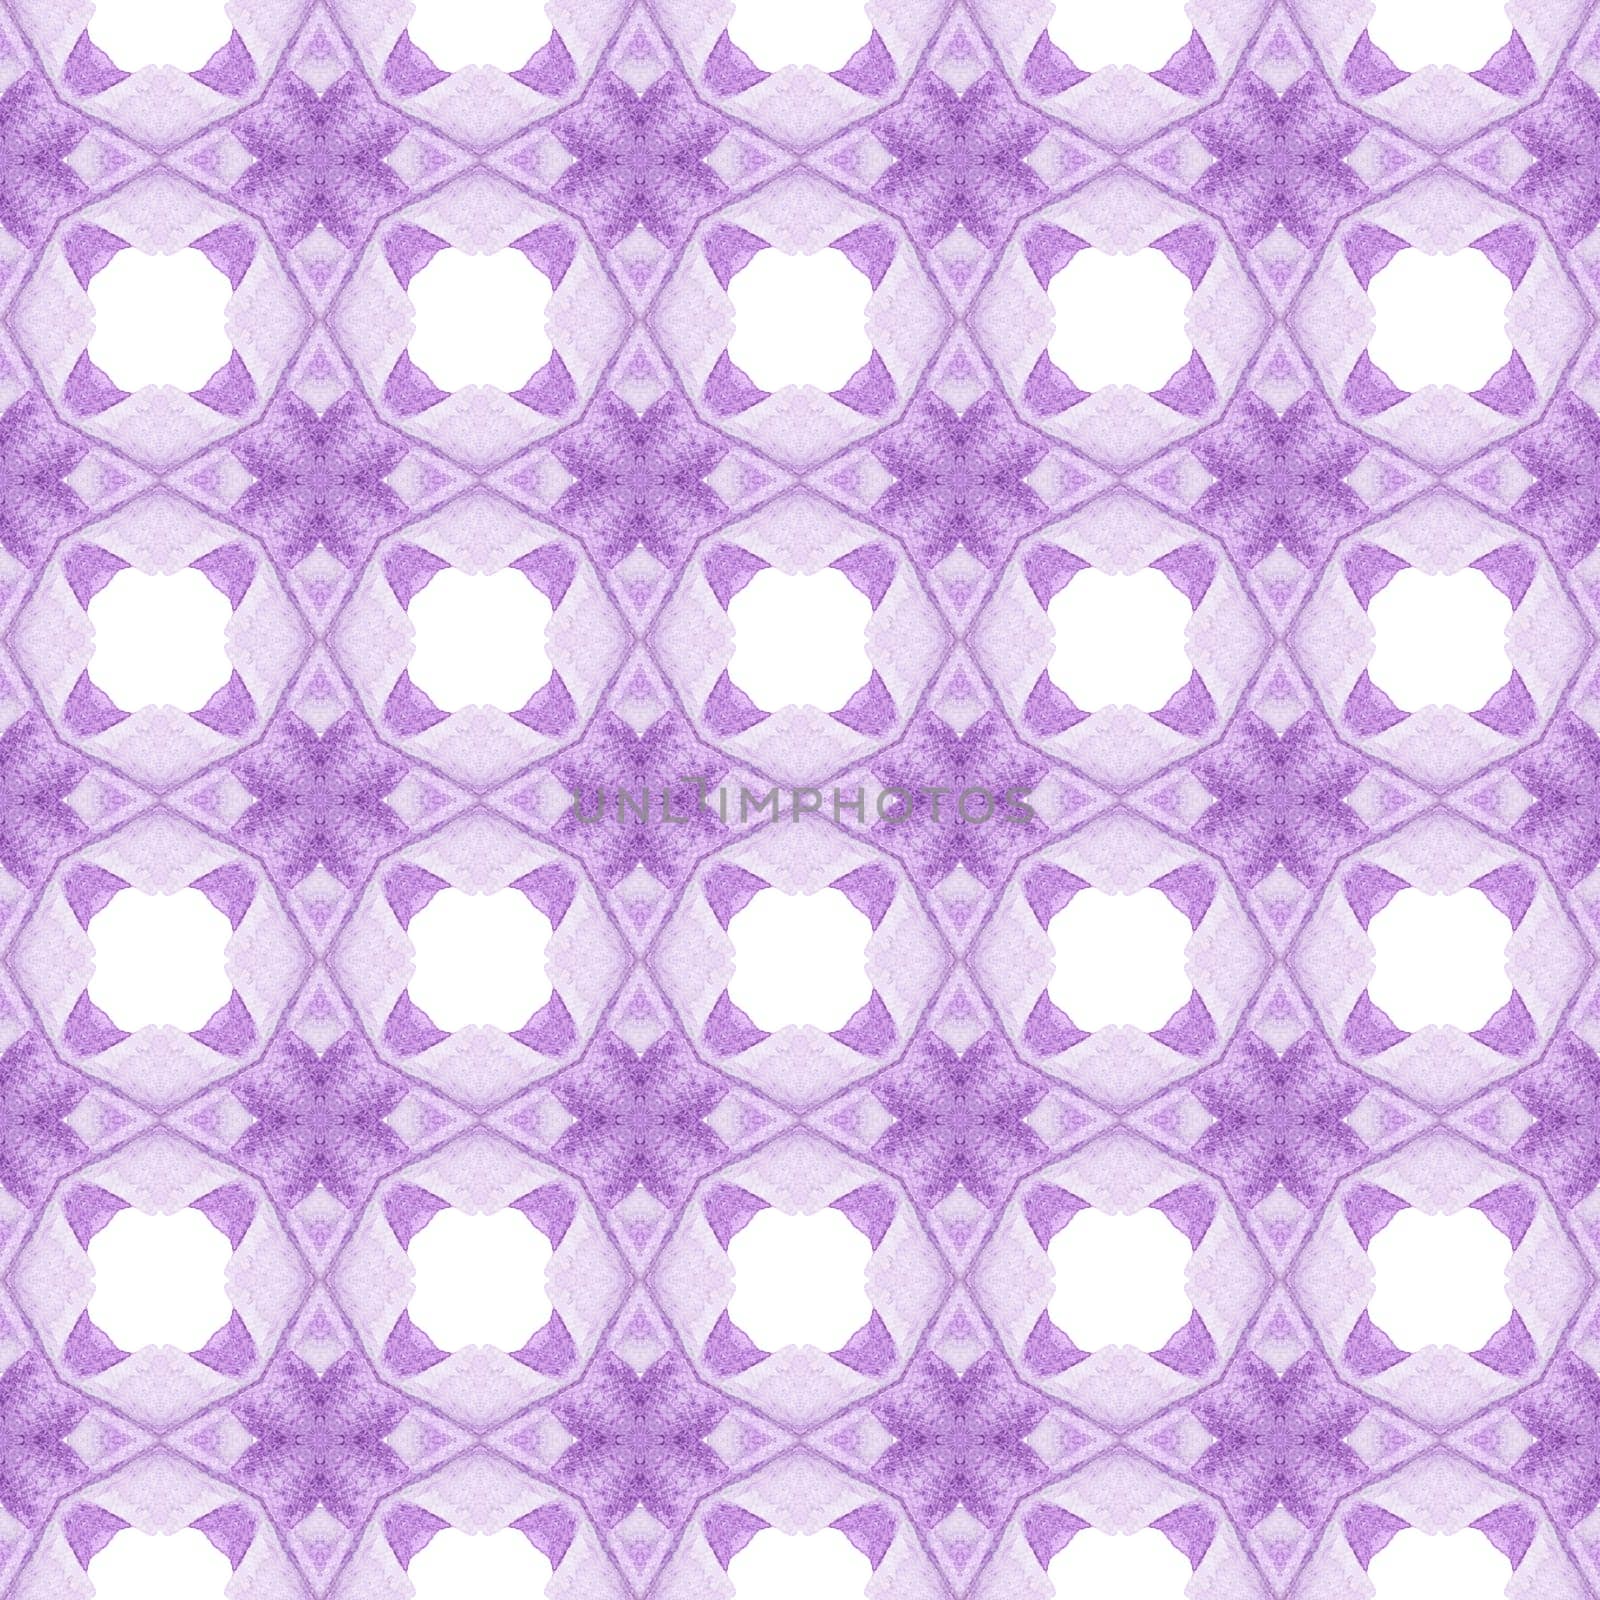 Tiled watercolor background. Purple dazzling by beginagain